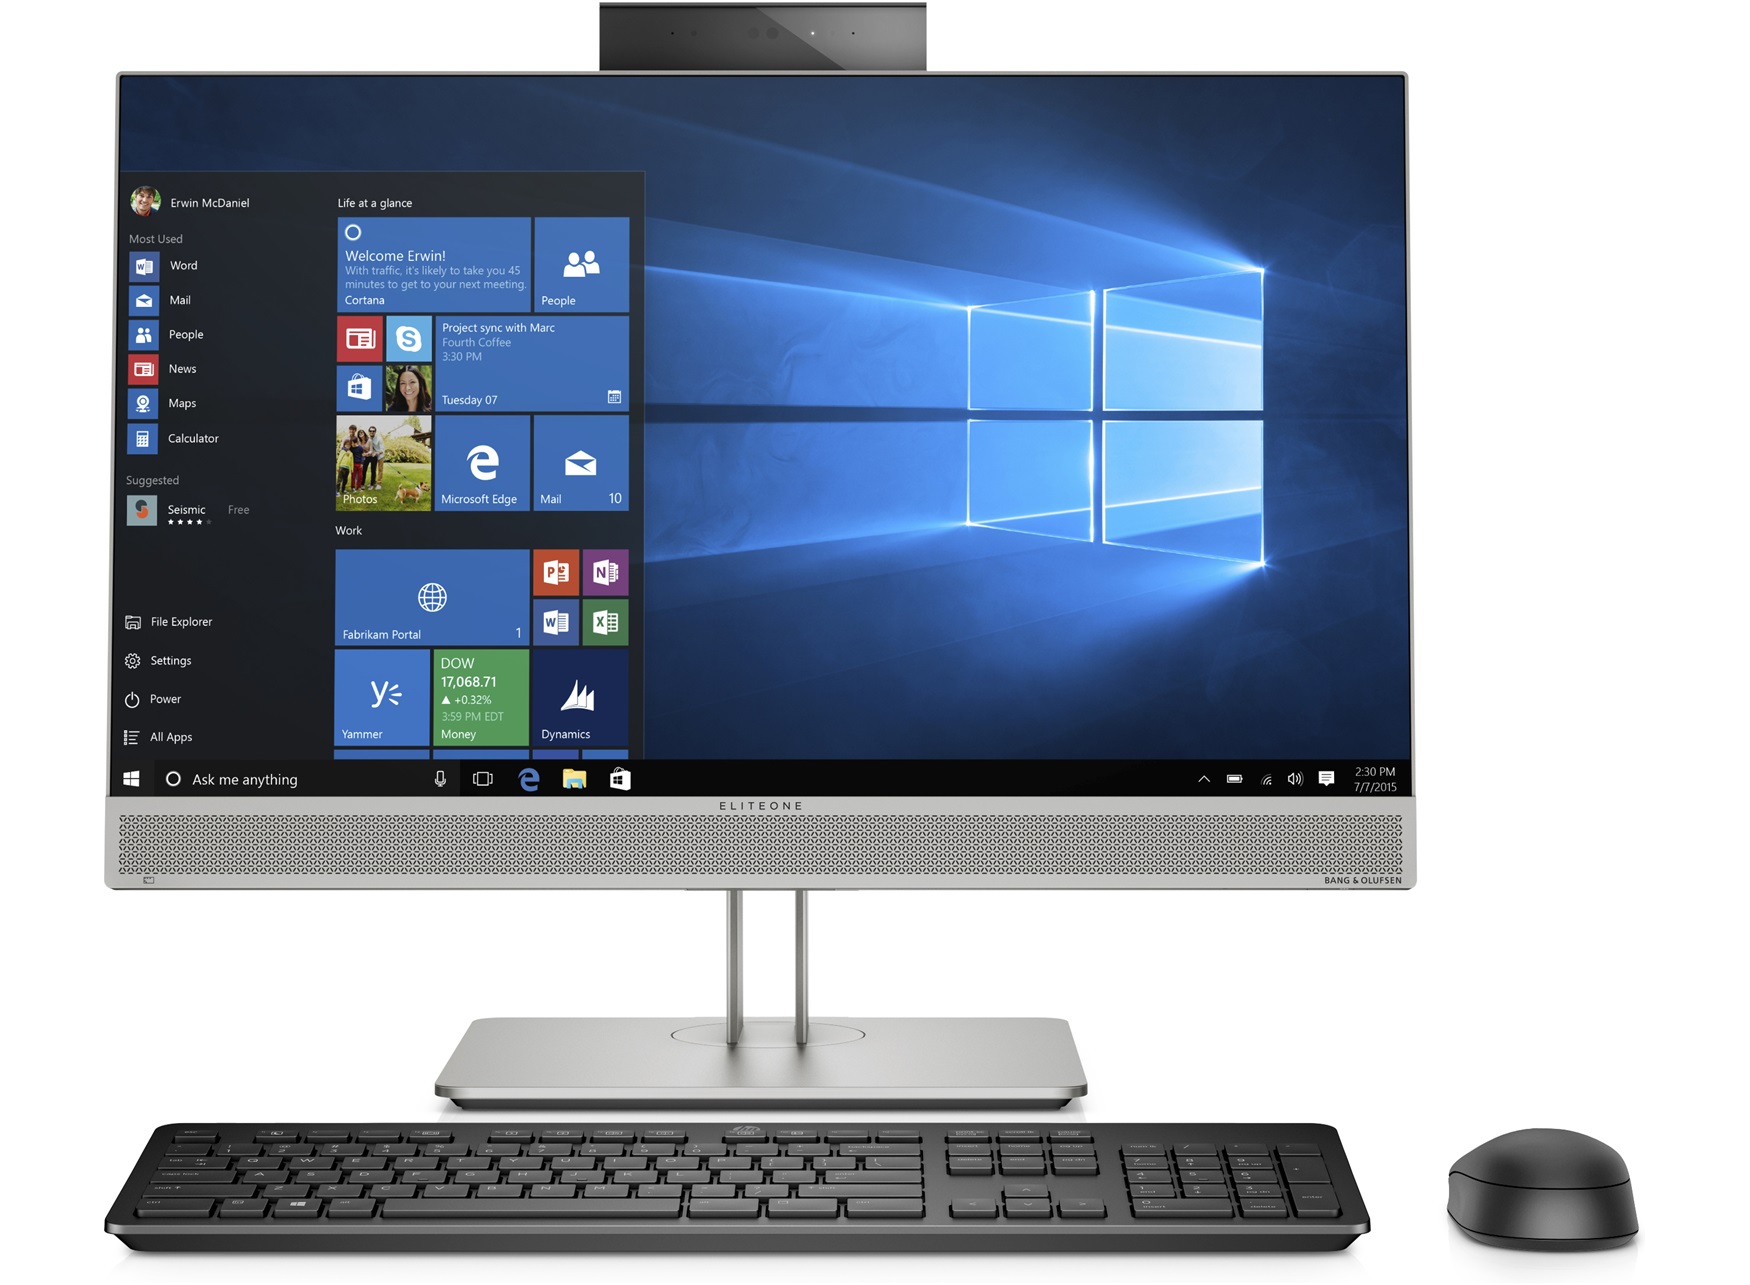 HP 800 EliteOne G5 AIO 23.8' NT i5-9500 8GB 256GB SSD WIN10 PRO HDMI DP DVD KB/Mouse WEBCAM 3YR ONSITE WTY W10P All-in-One Desktop PC (7NX97PA)(LS)